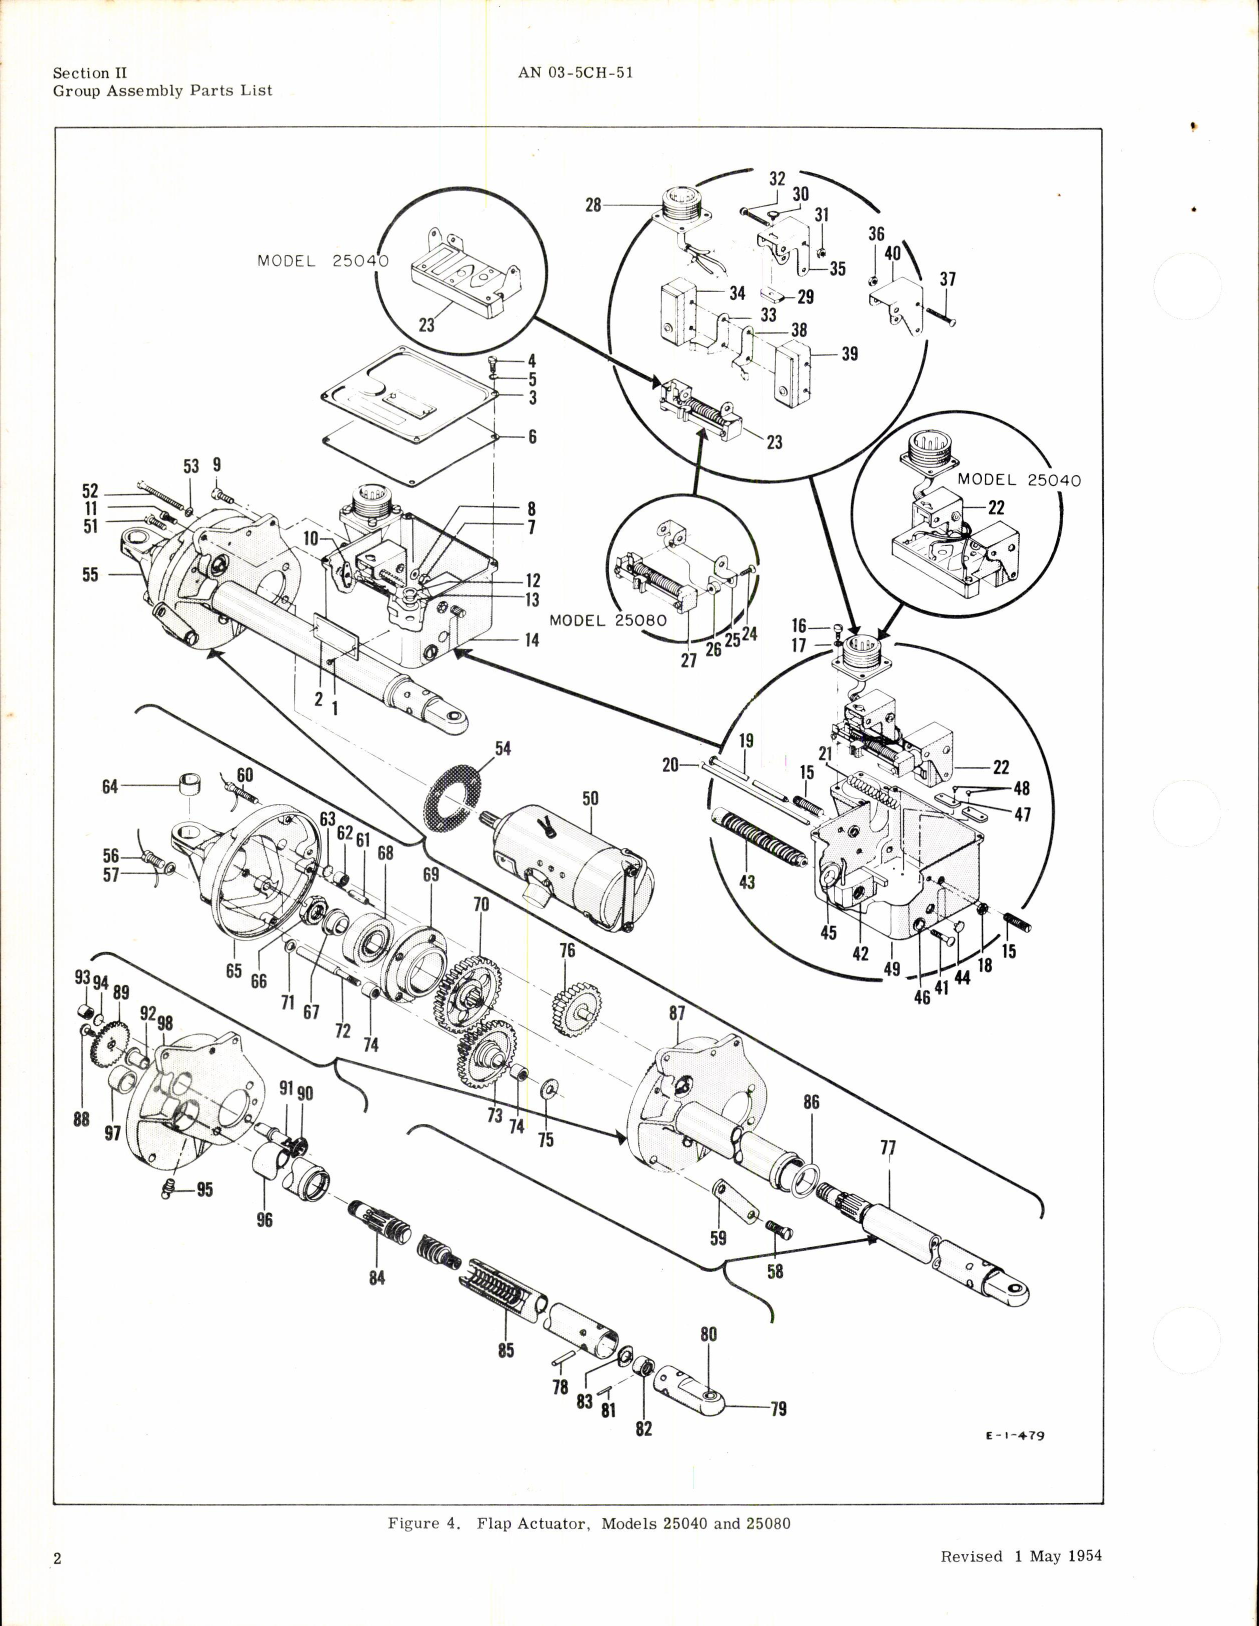 Sample page 4 from AirCorps Library document: Parts Catalog for Electric Motor-Driven Actuators (Linear & Rotary Torque)